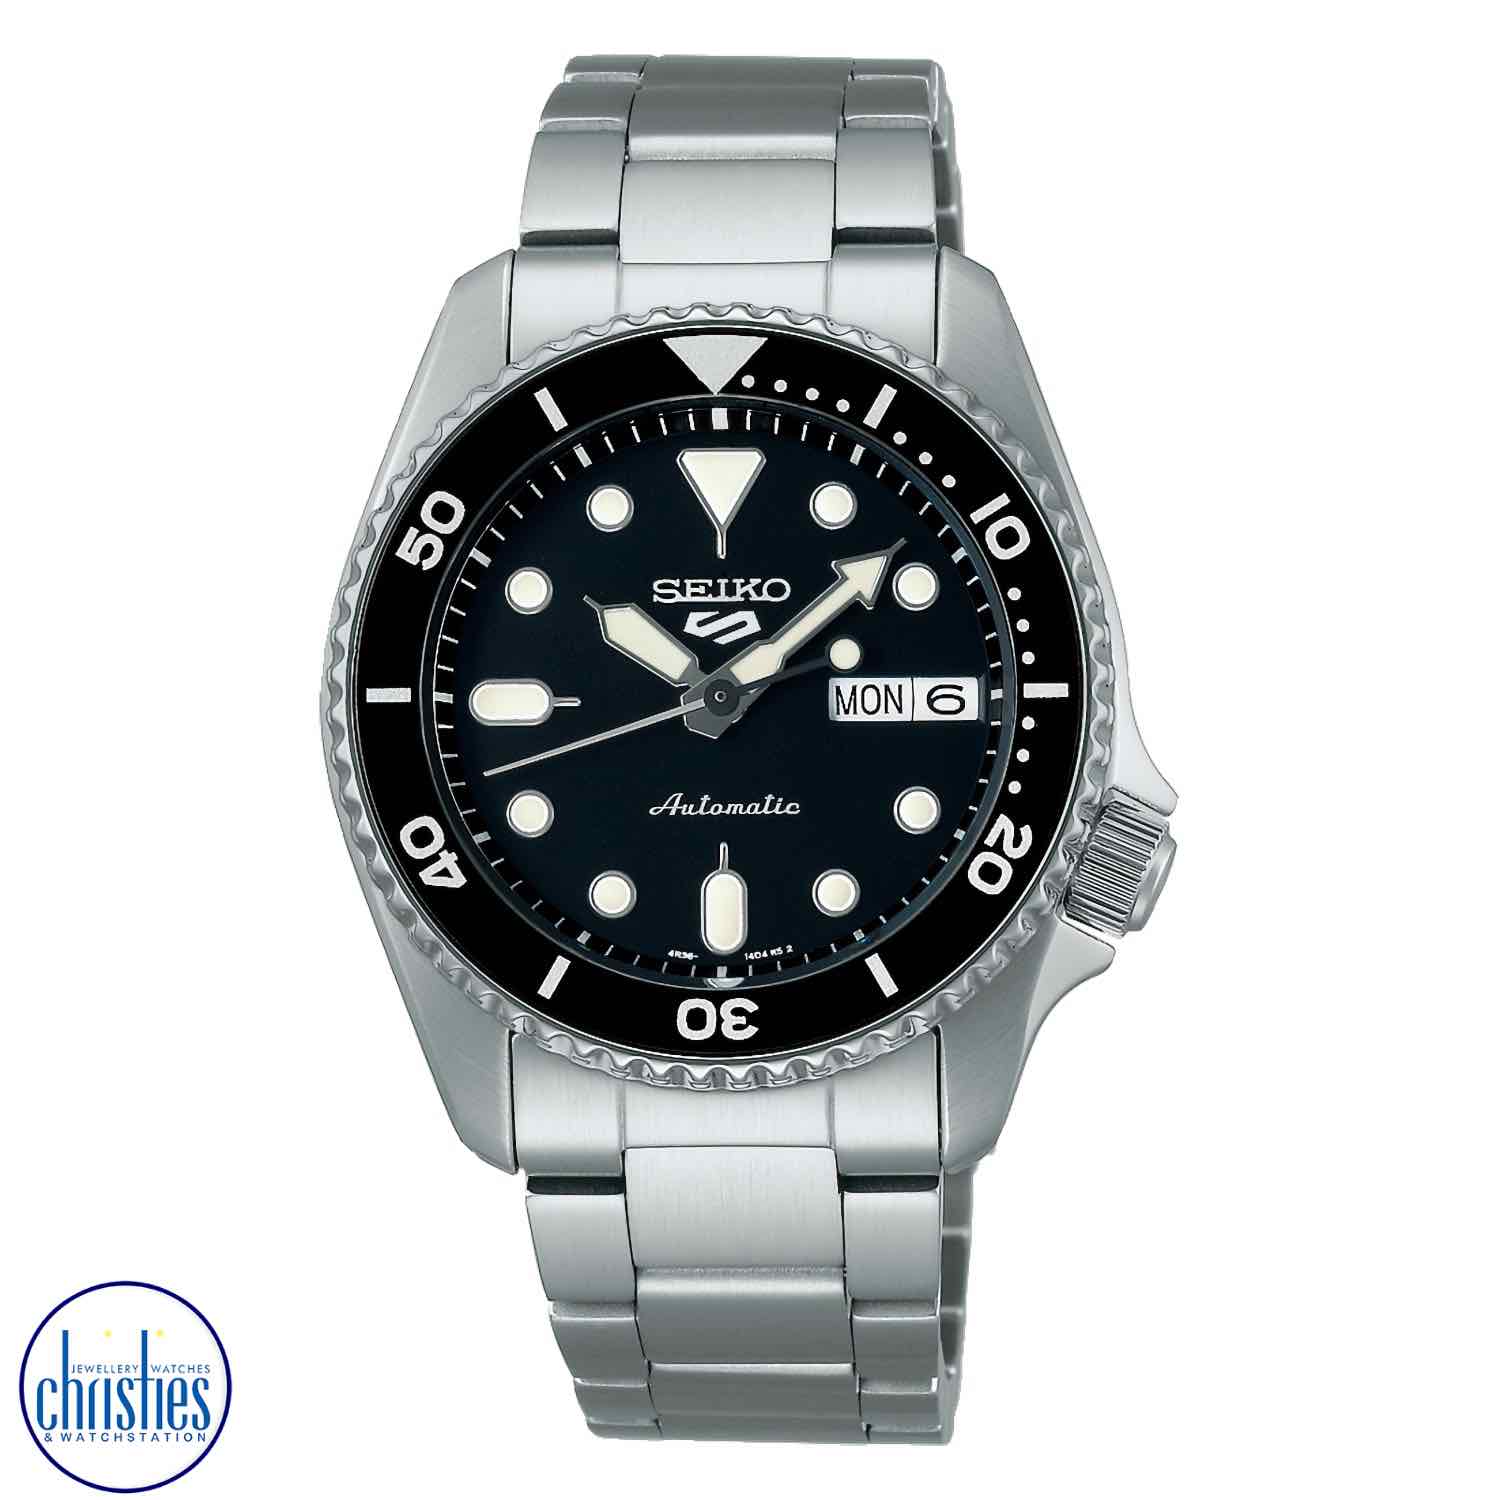 SRPK29K SEIKO 5 Automatic Watch. Introducing the newest addition to the Seiko 5 lineup, the SRPK29 watch.